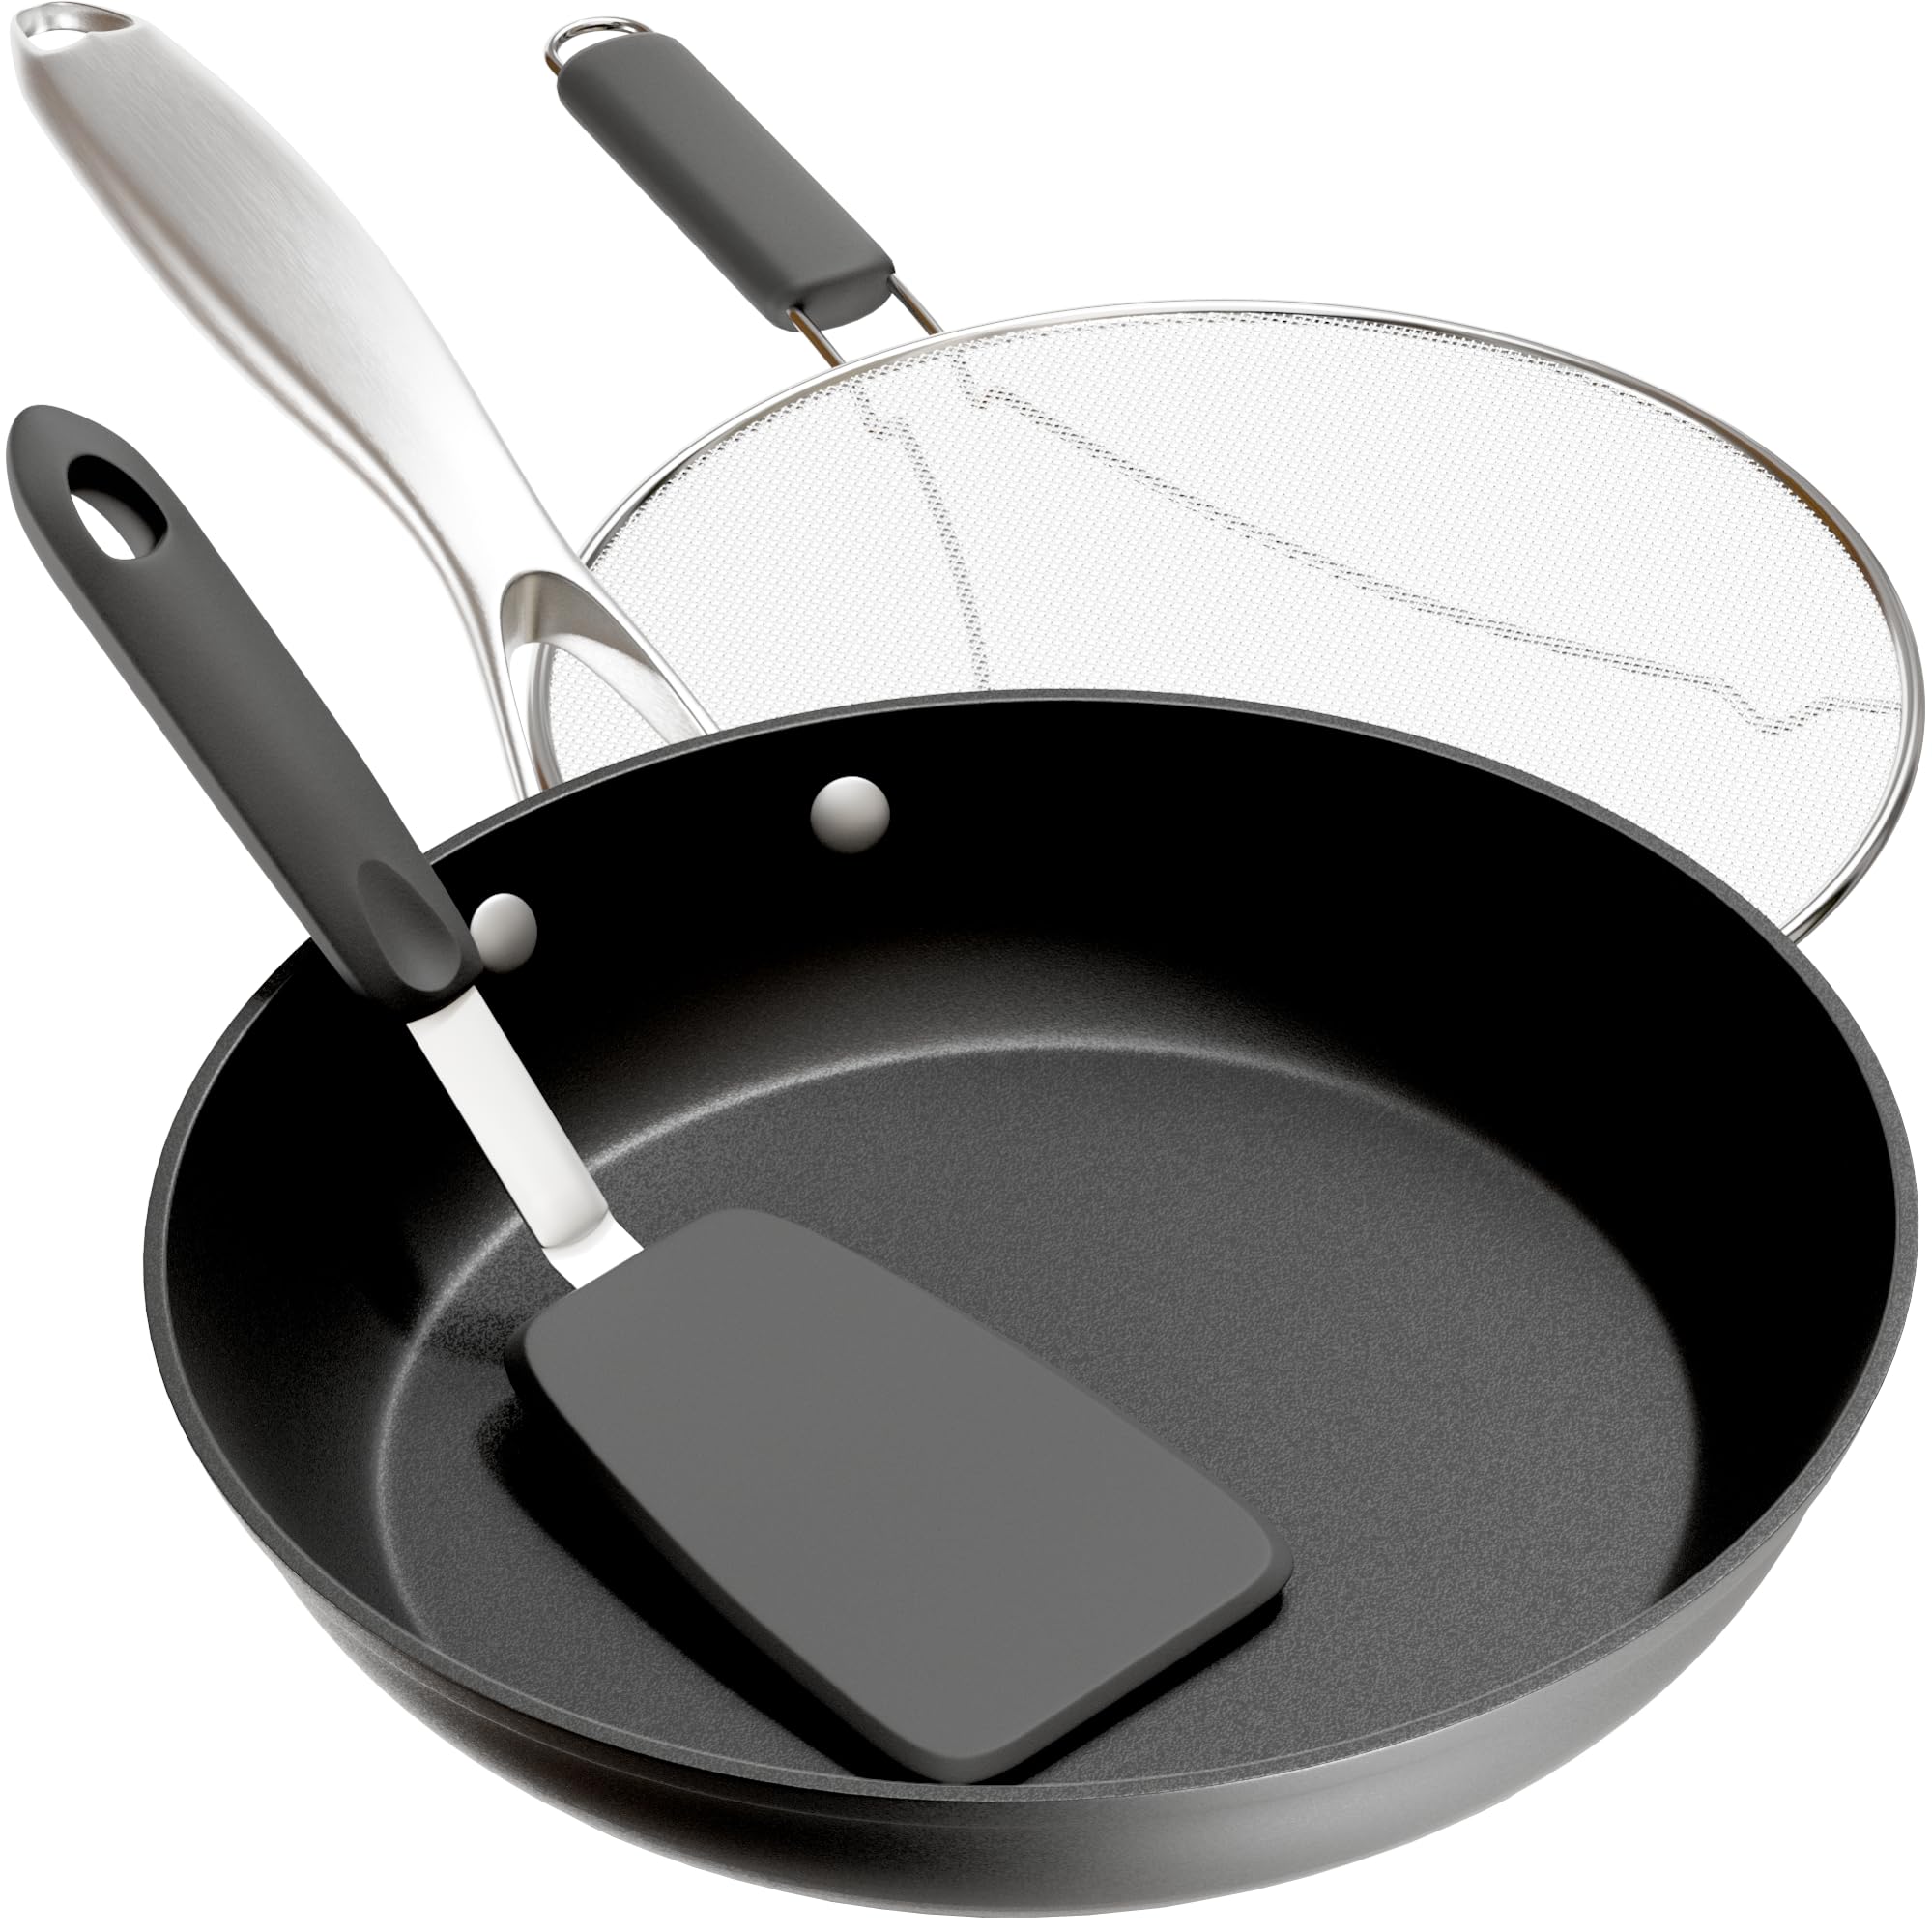 Frying Pans Nonstick - 10" Non Stick Frying Pan with Lid Splatter Screen - Lightweight Aluminum Fry Pan Skillet Includes Spatula - 2" Deep Egg Pan, PFAS-Free and PFOA Free, Dishwasher Safe, Oven Safe  - Very Good